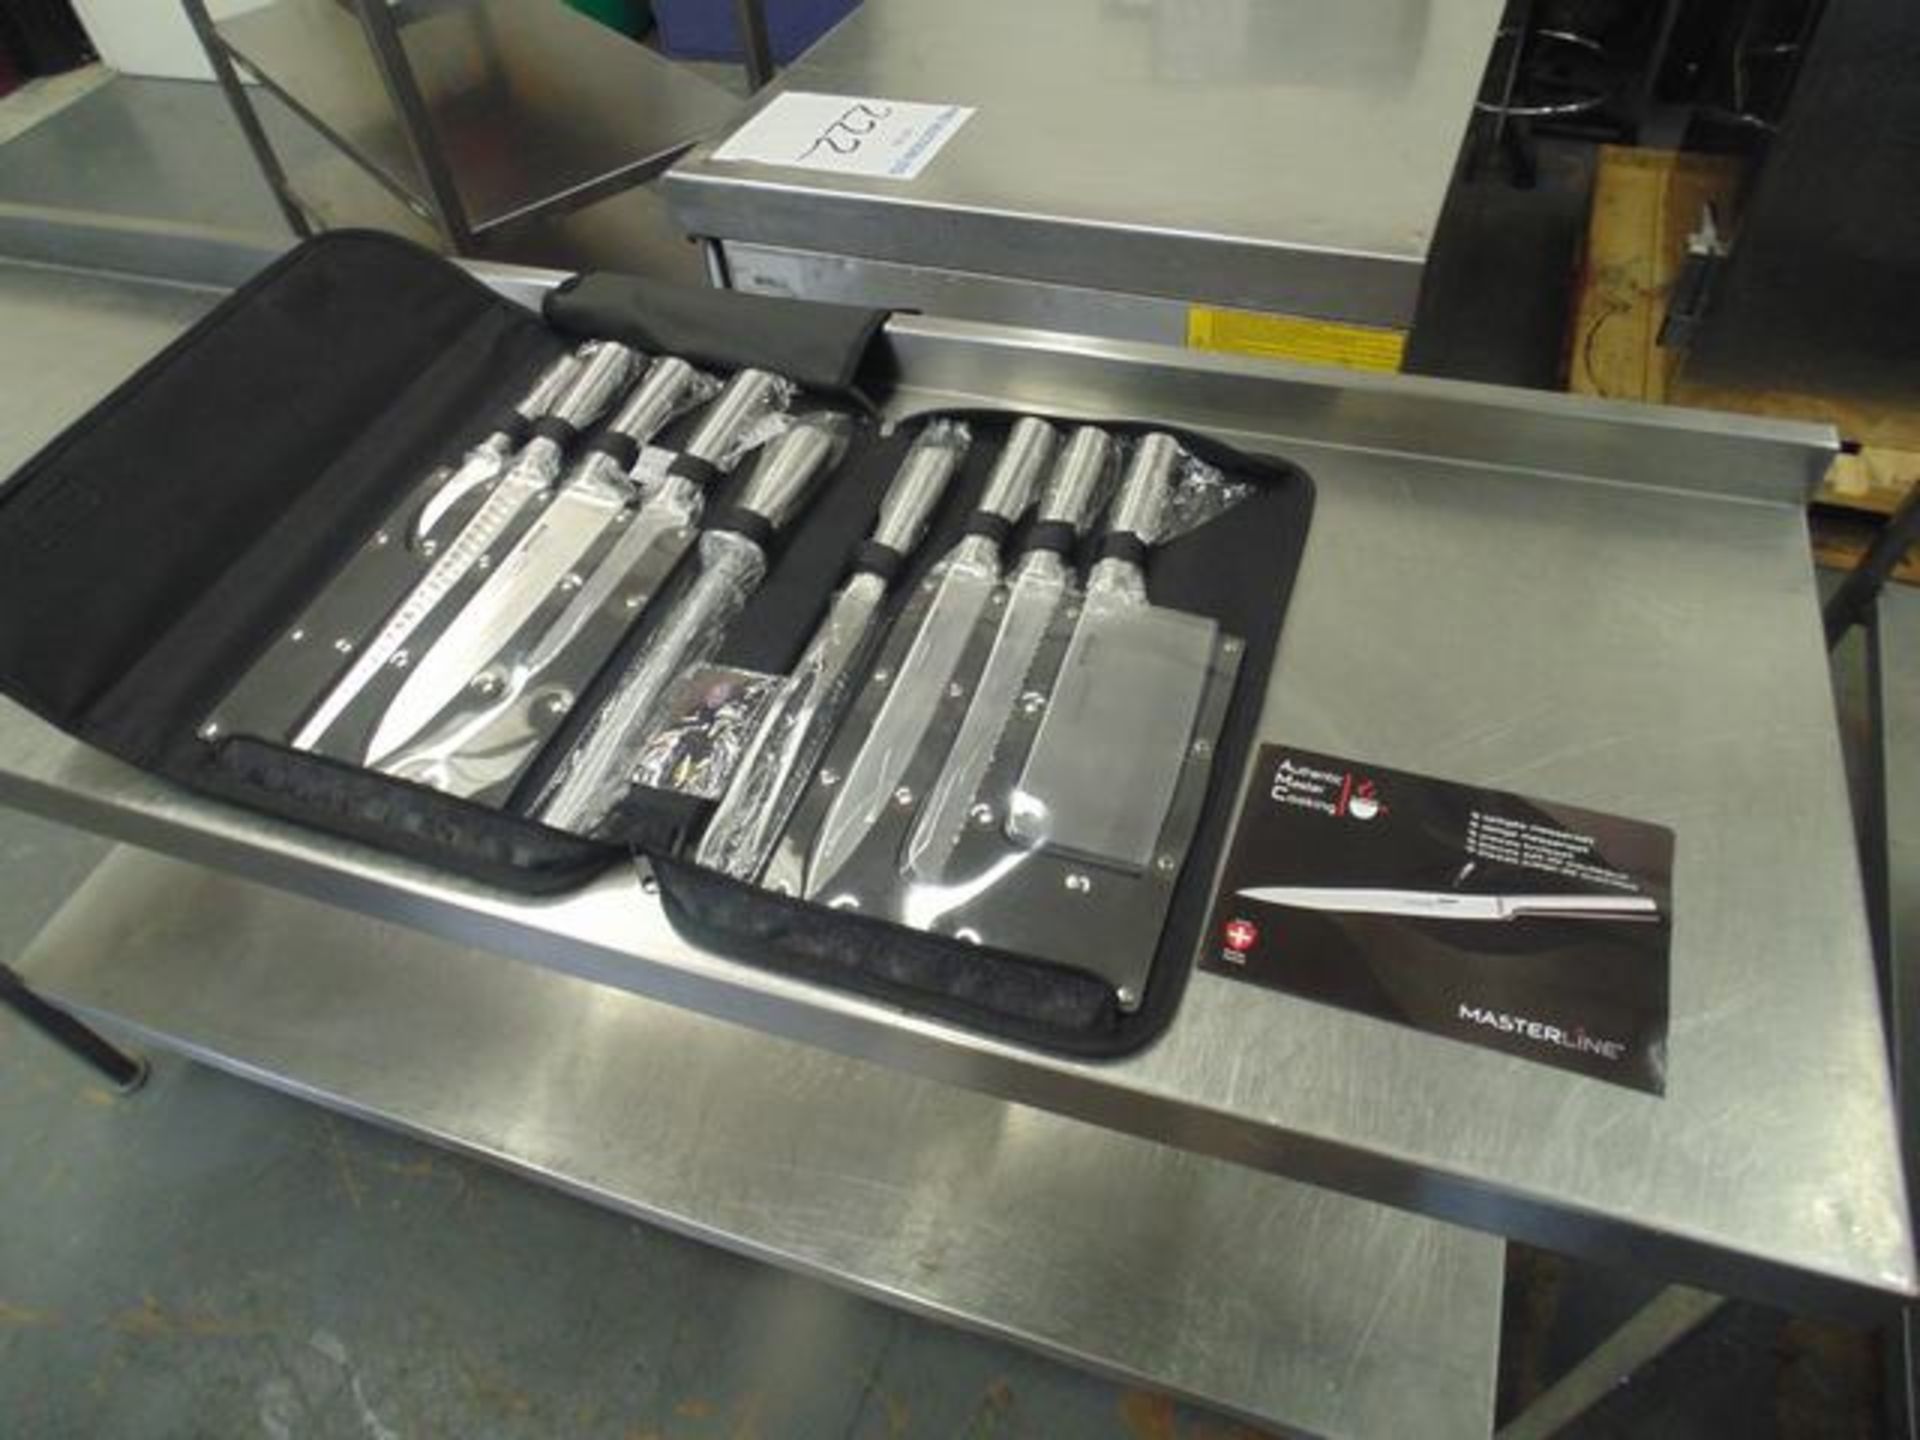 Masterline Commercial Chef knife set finest high carbon stainless steel